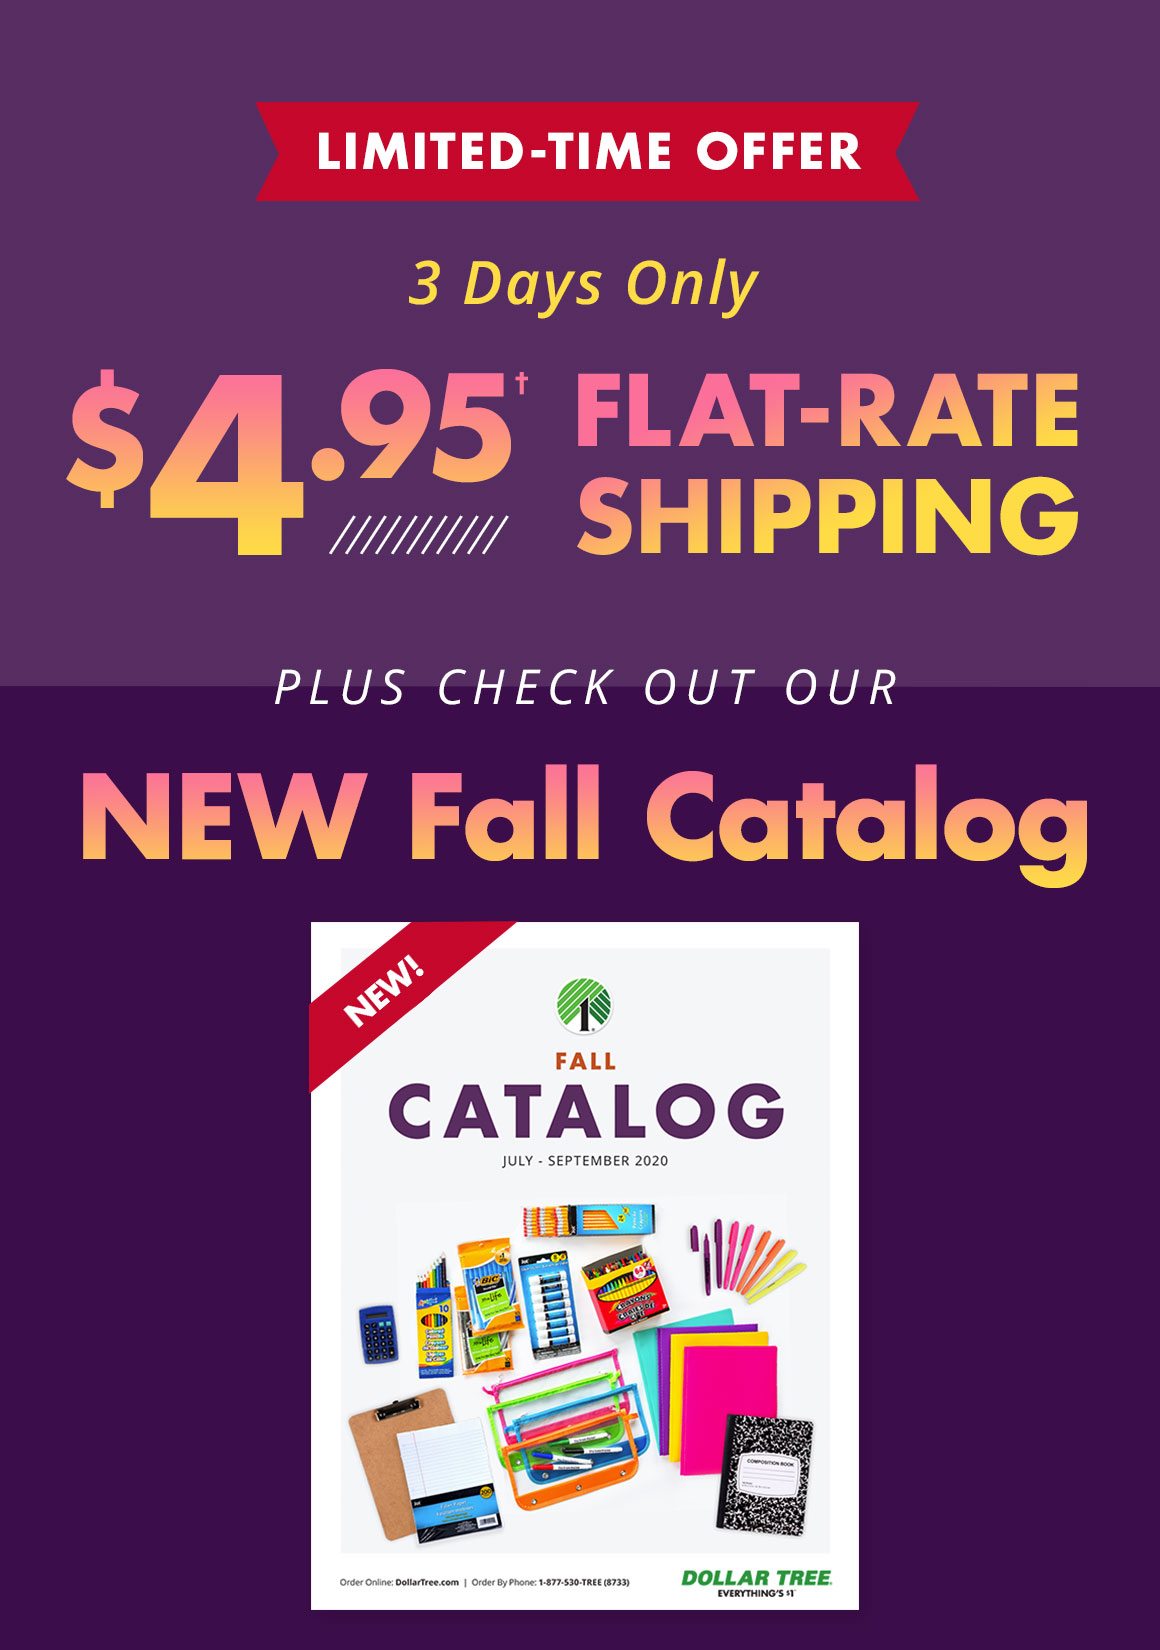 Check Out our Fall Catalog!